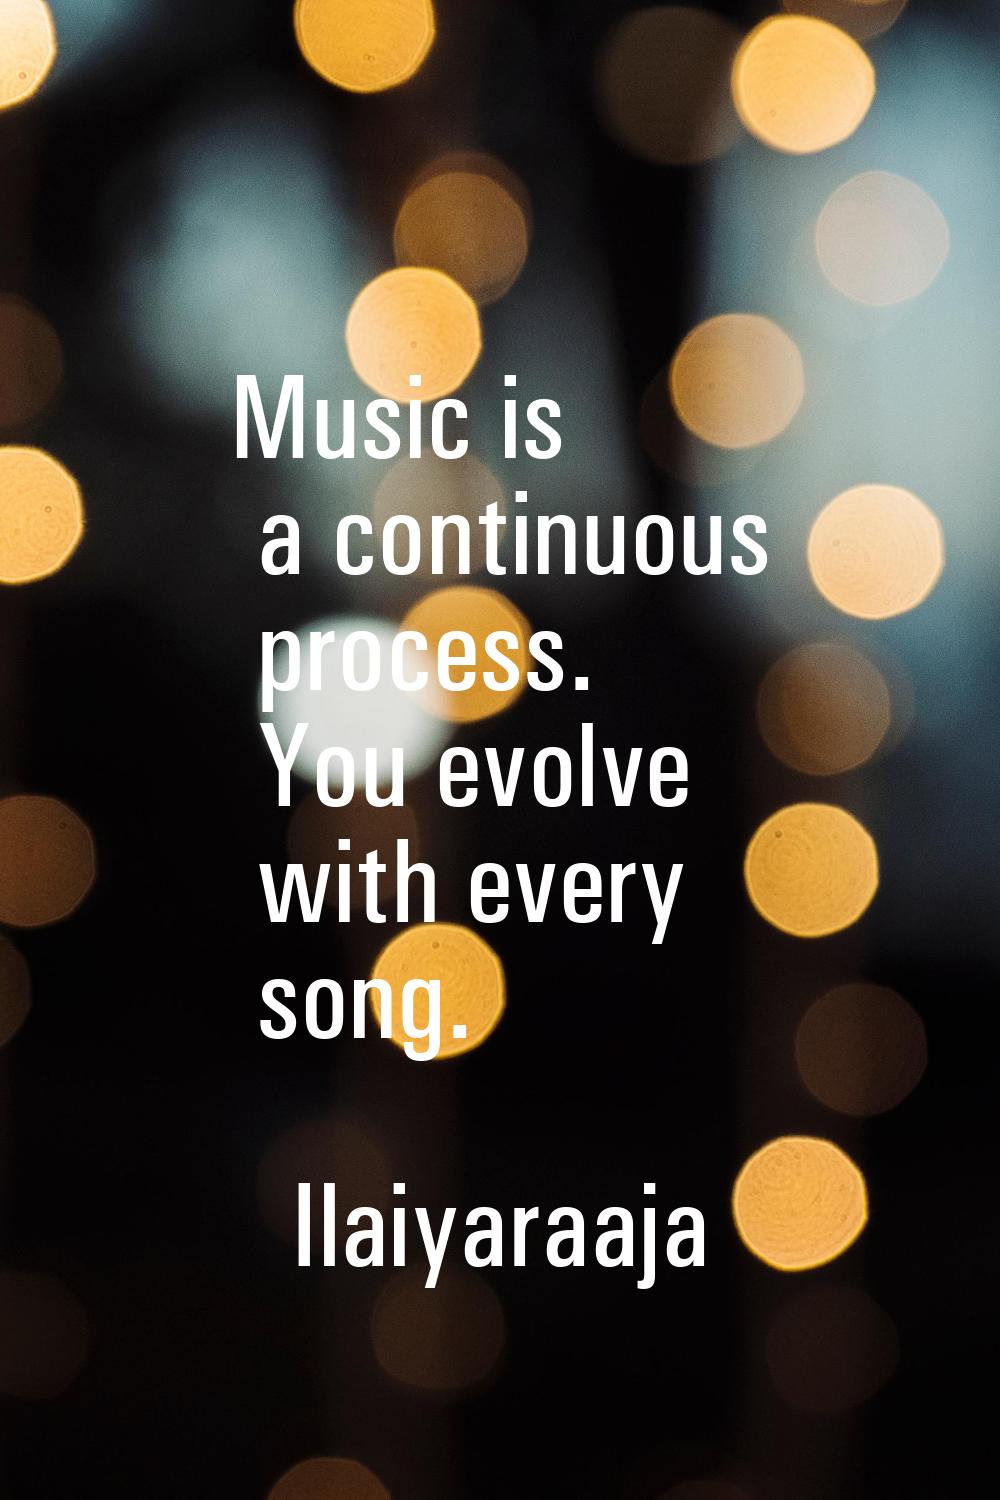 Music is a continuous process. You evolve with every song.